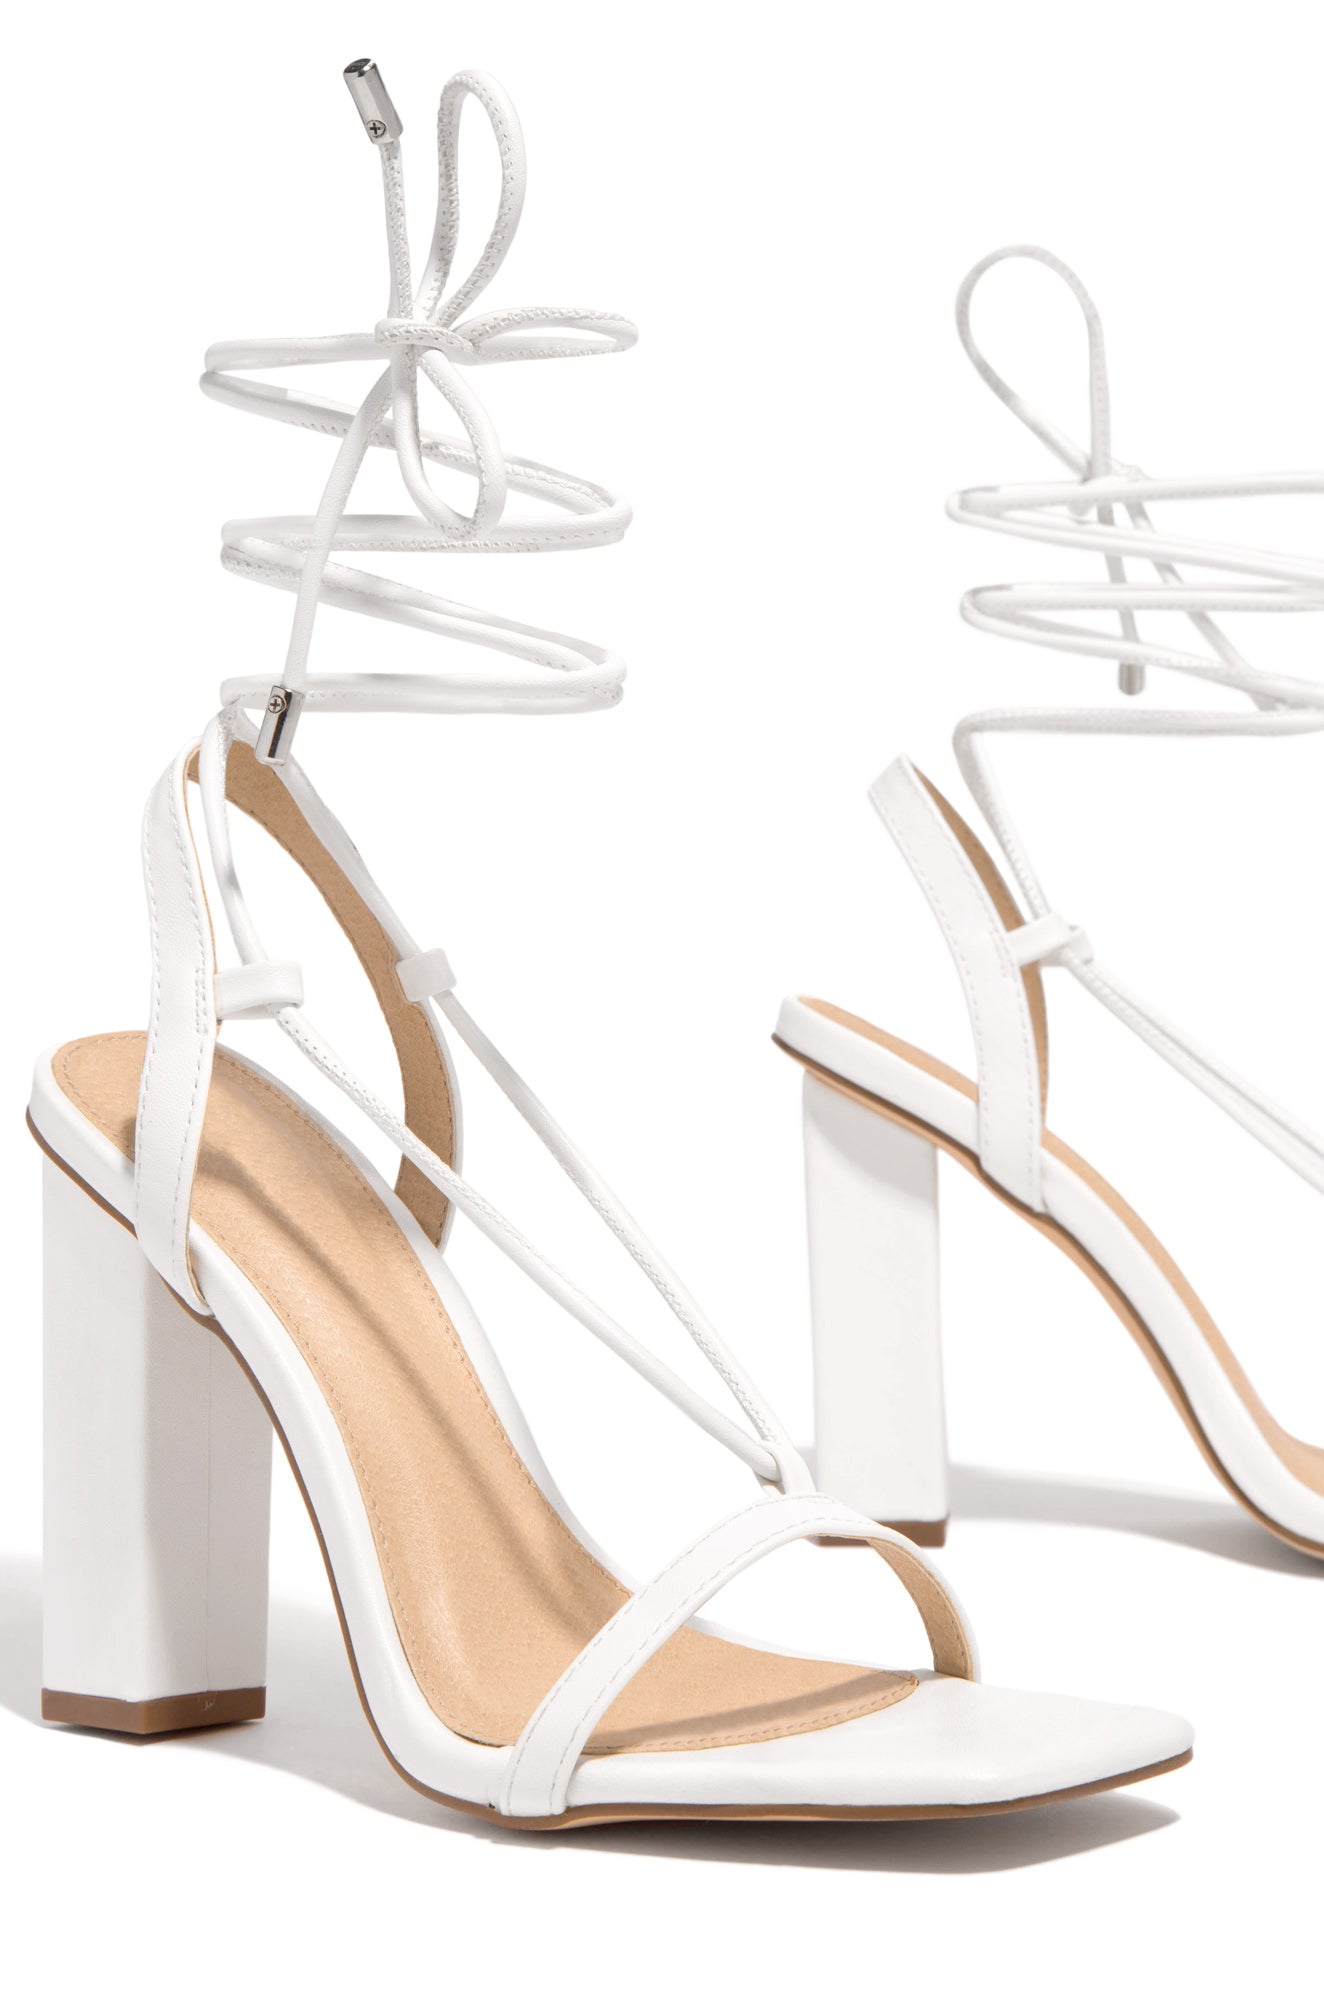 White High Heels - Faux Leather Heels - Strappy High Heels - Lulus